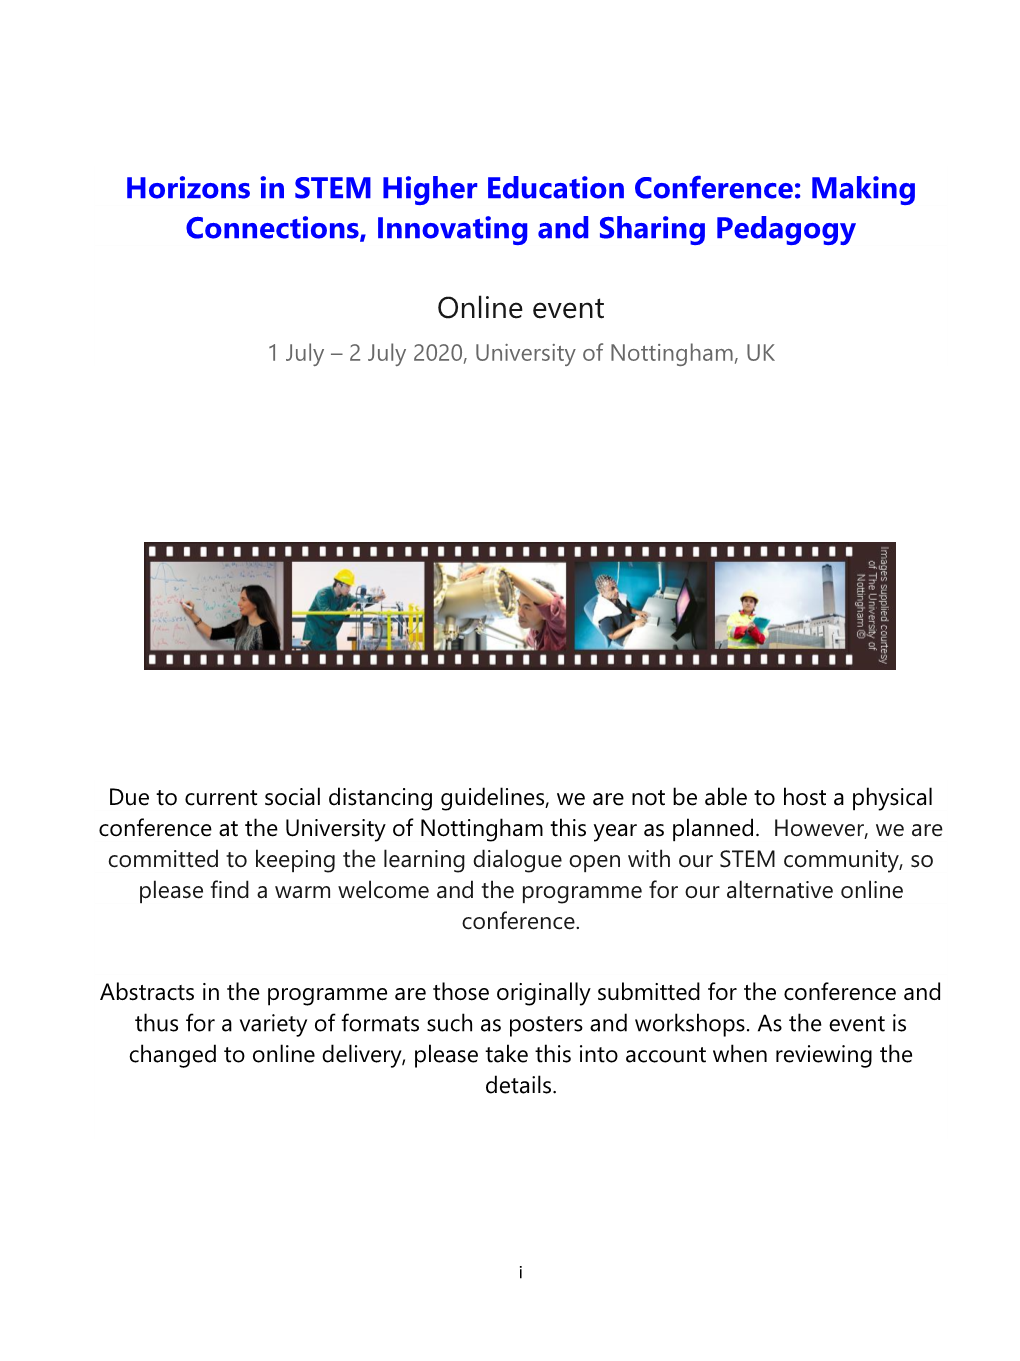 Horizons in STEM Higher Education Conference: Making Connections, Innovating and Sharing Pedagogy